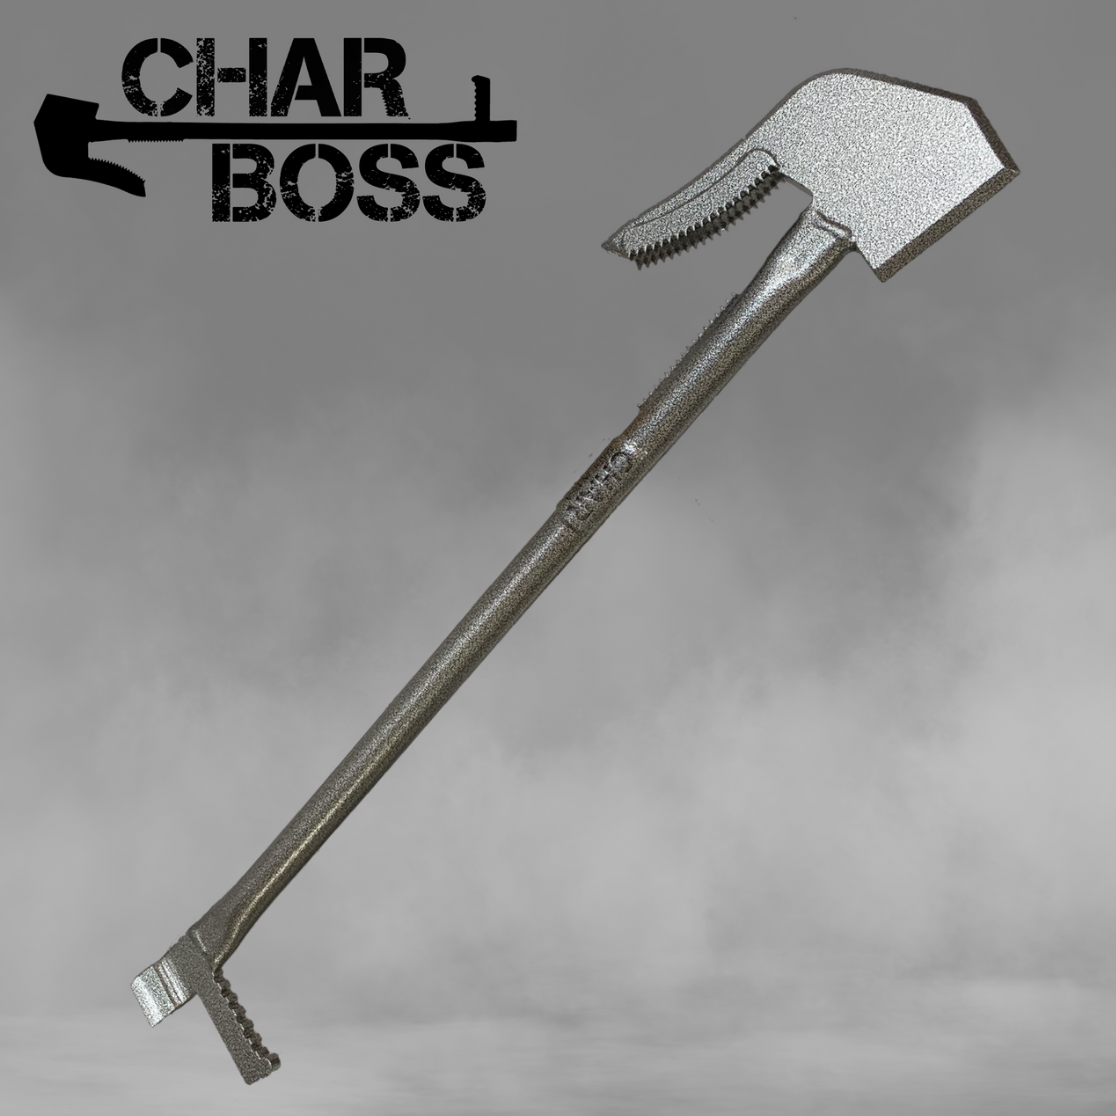 The CHAR Tool